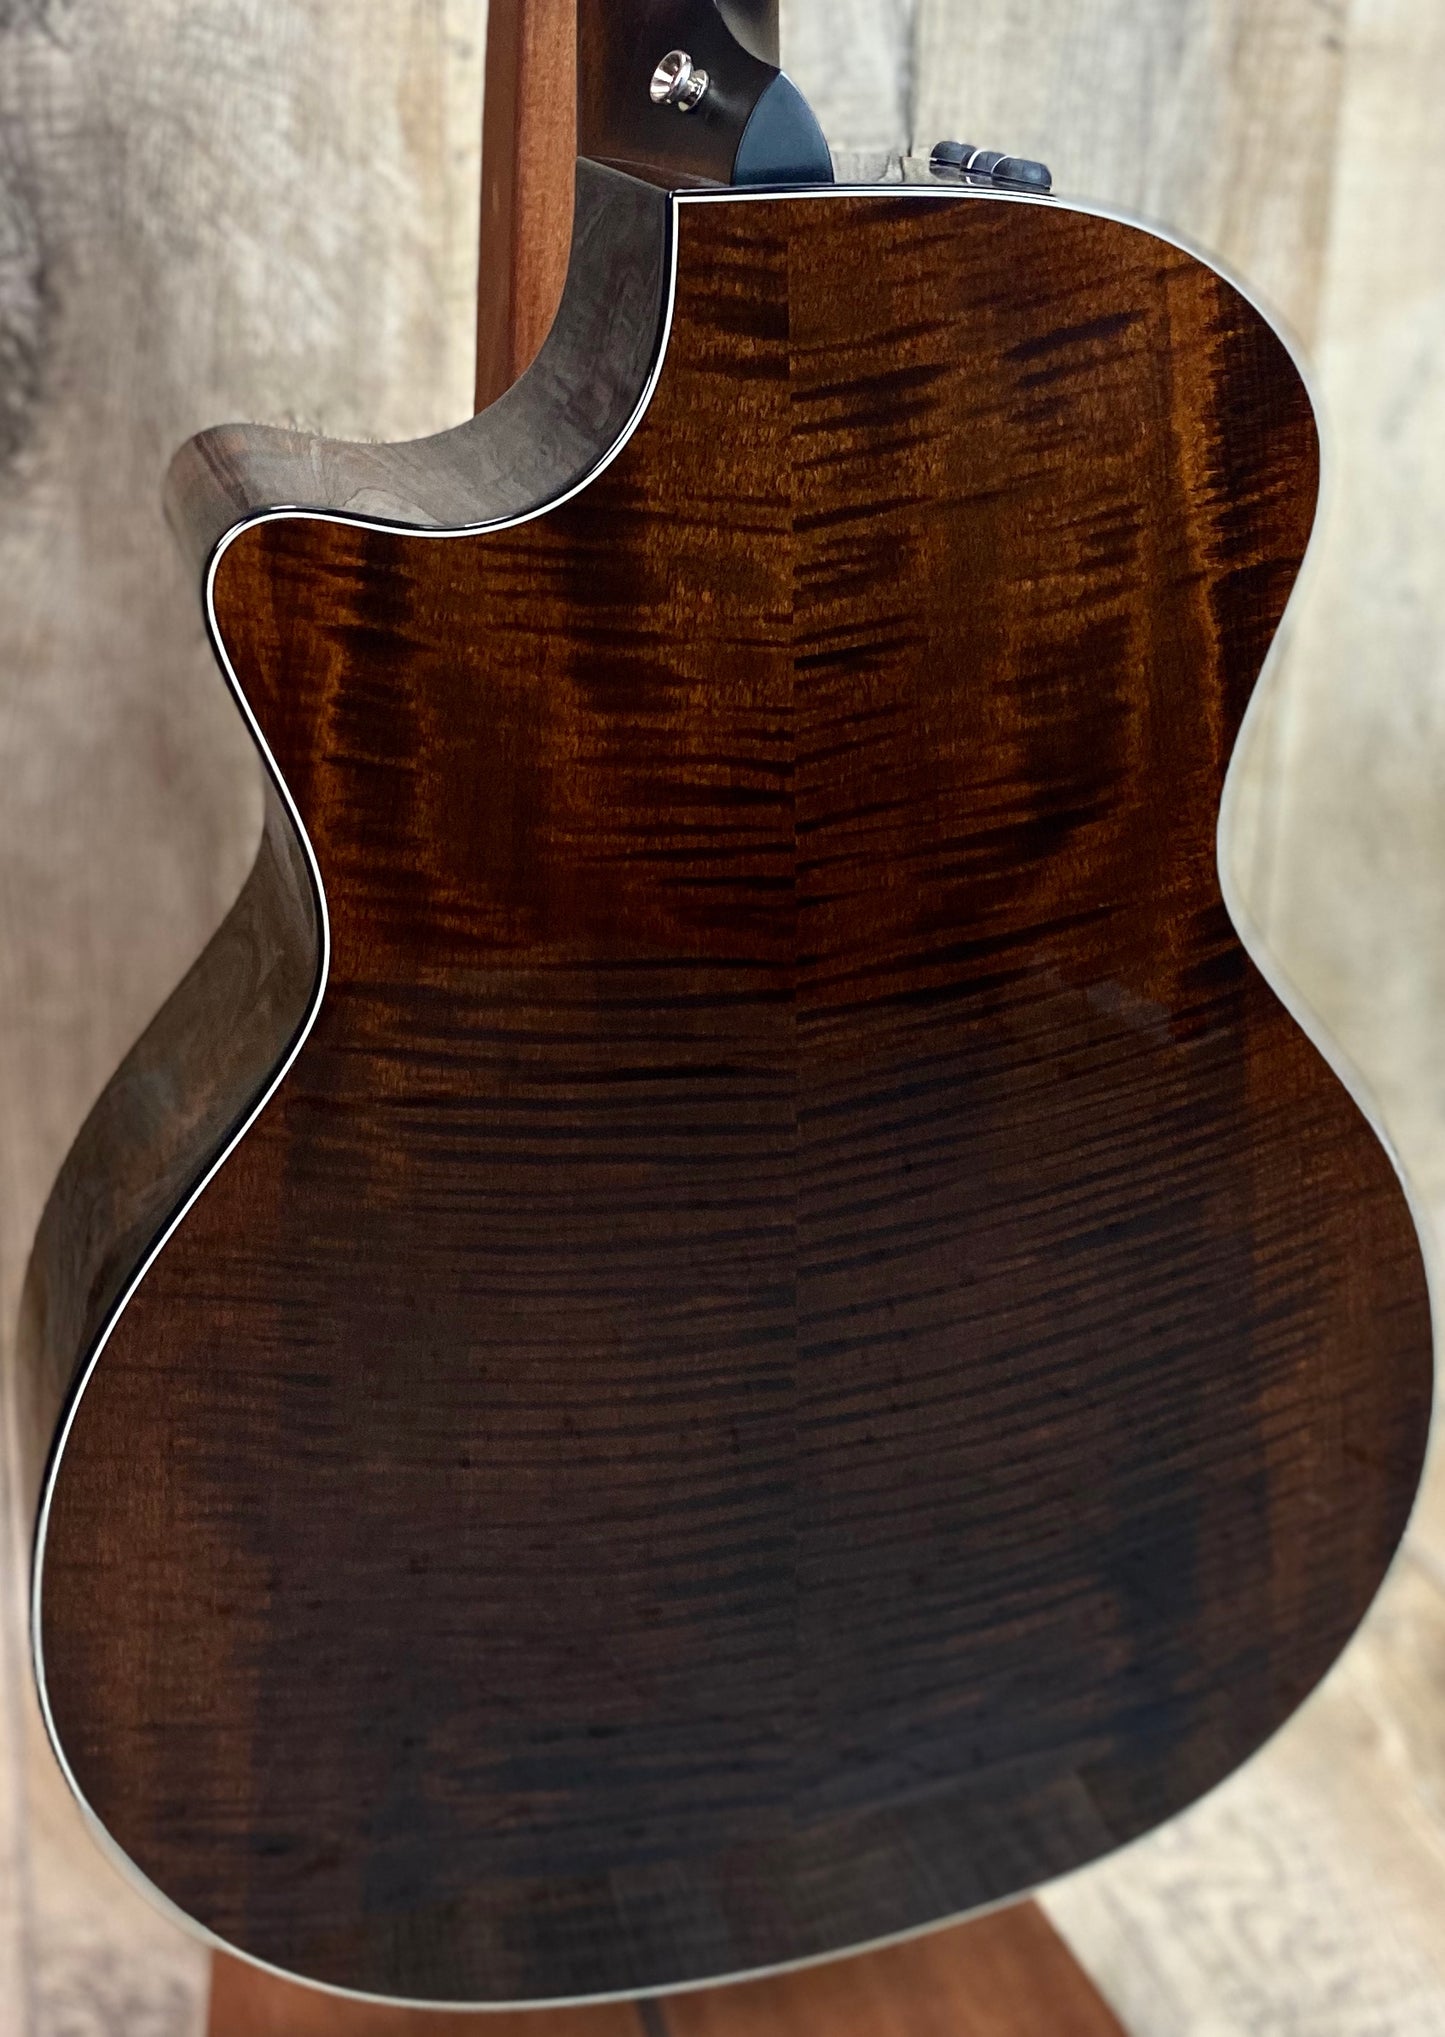 Back of Taylor 614ce Acoustic Guitar body with Sitka spruce top Tone Shop Guitars Dallas